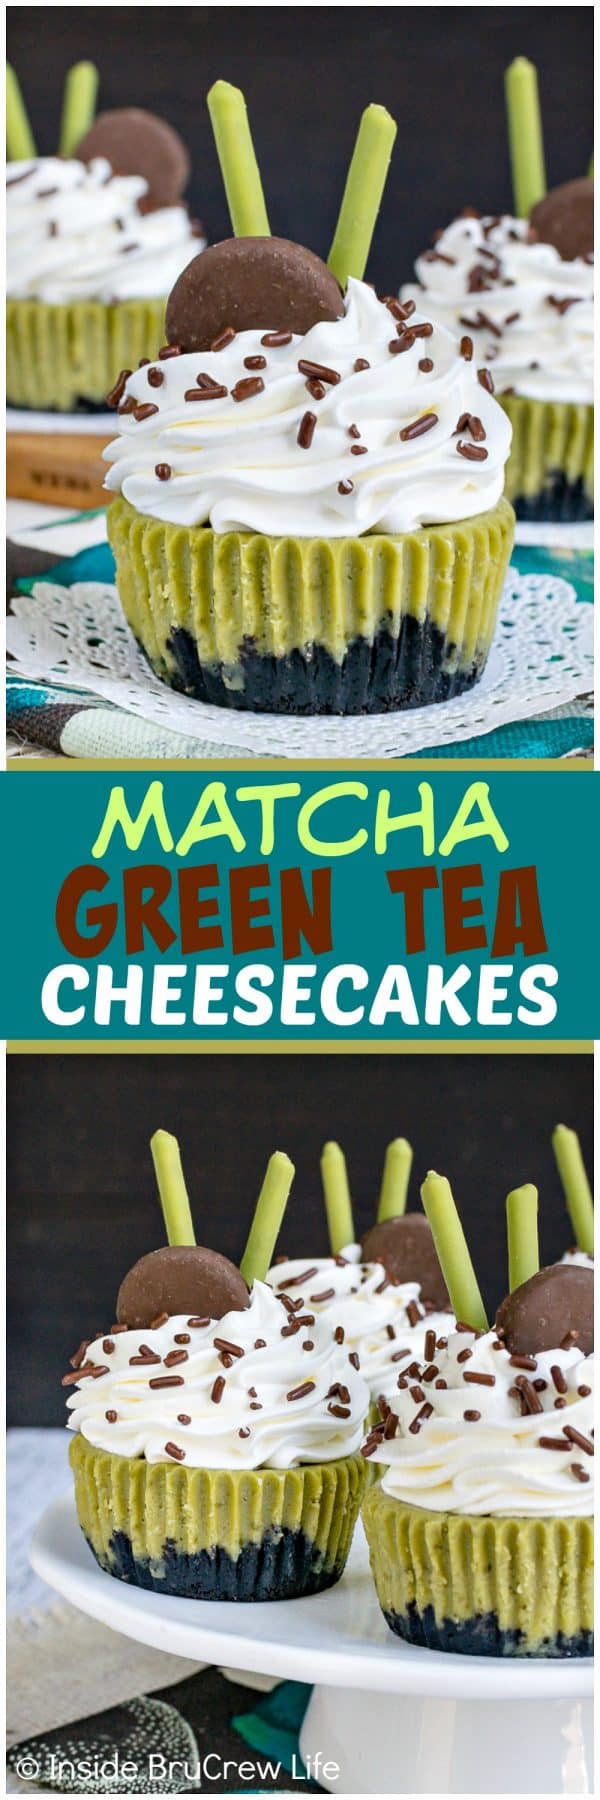 Matcha Green Tea Cheesecakes - a chocolate cookie crust and sweet green tea flavor in these mini cheesecakes is delicious on a hot sunny day. Make this easy recipe for summer picnics! #cheesecake #matcha #greentea #minidesserts #summer #picnic #recipe